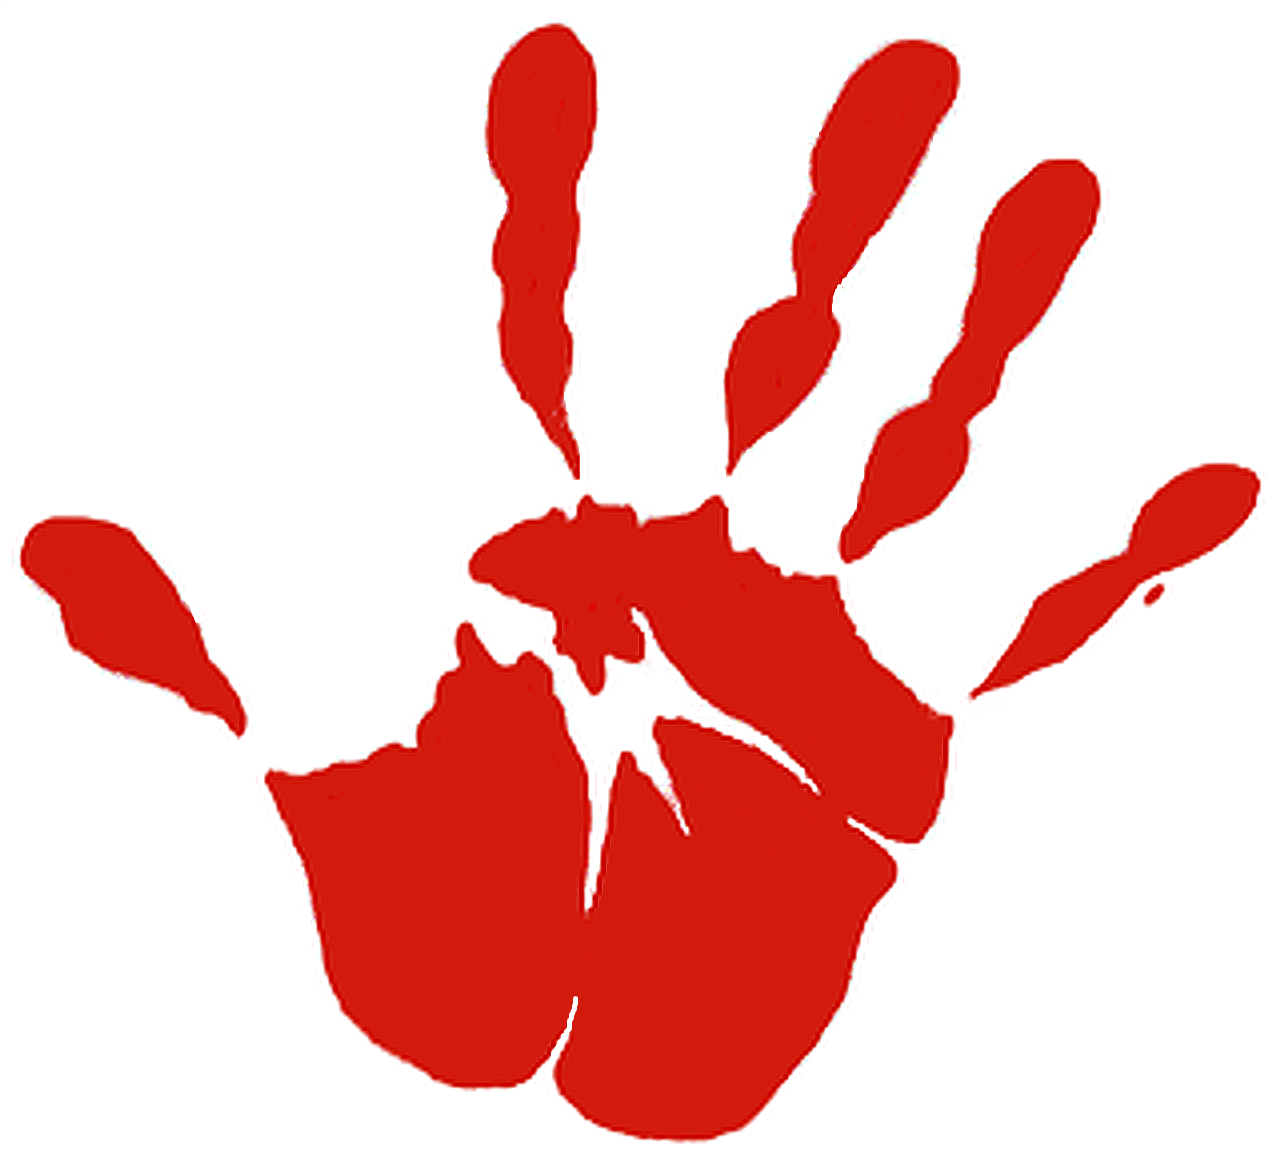 Red Hand Logo - Pictures of Two Red Hands Logo - www.kidskunst.info